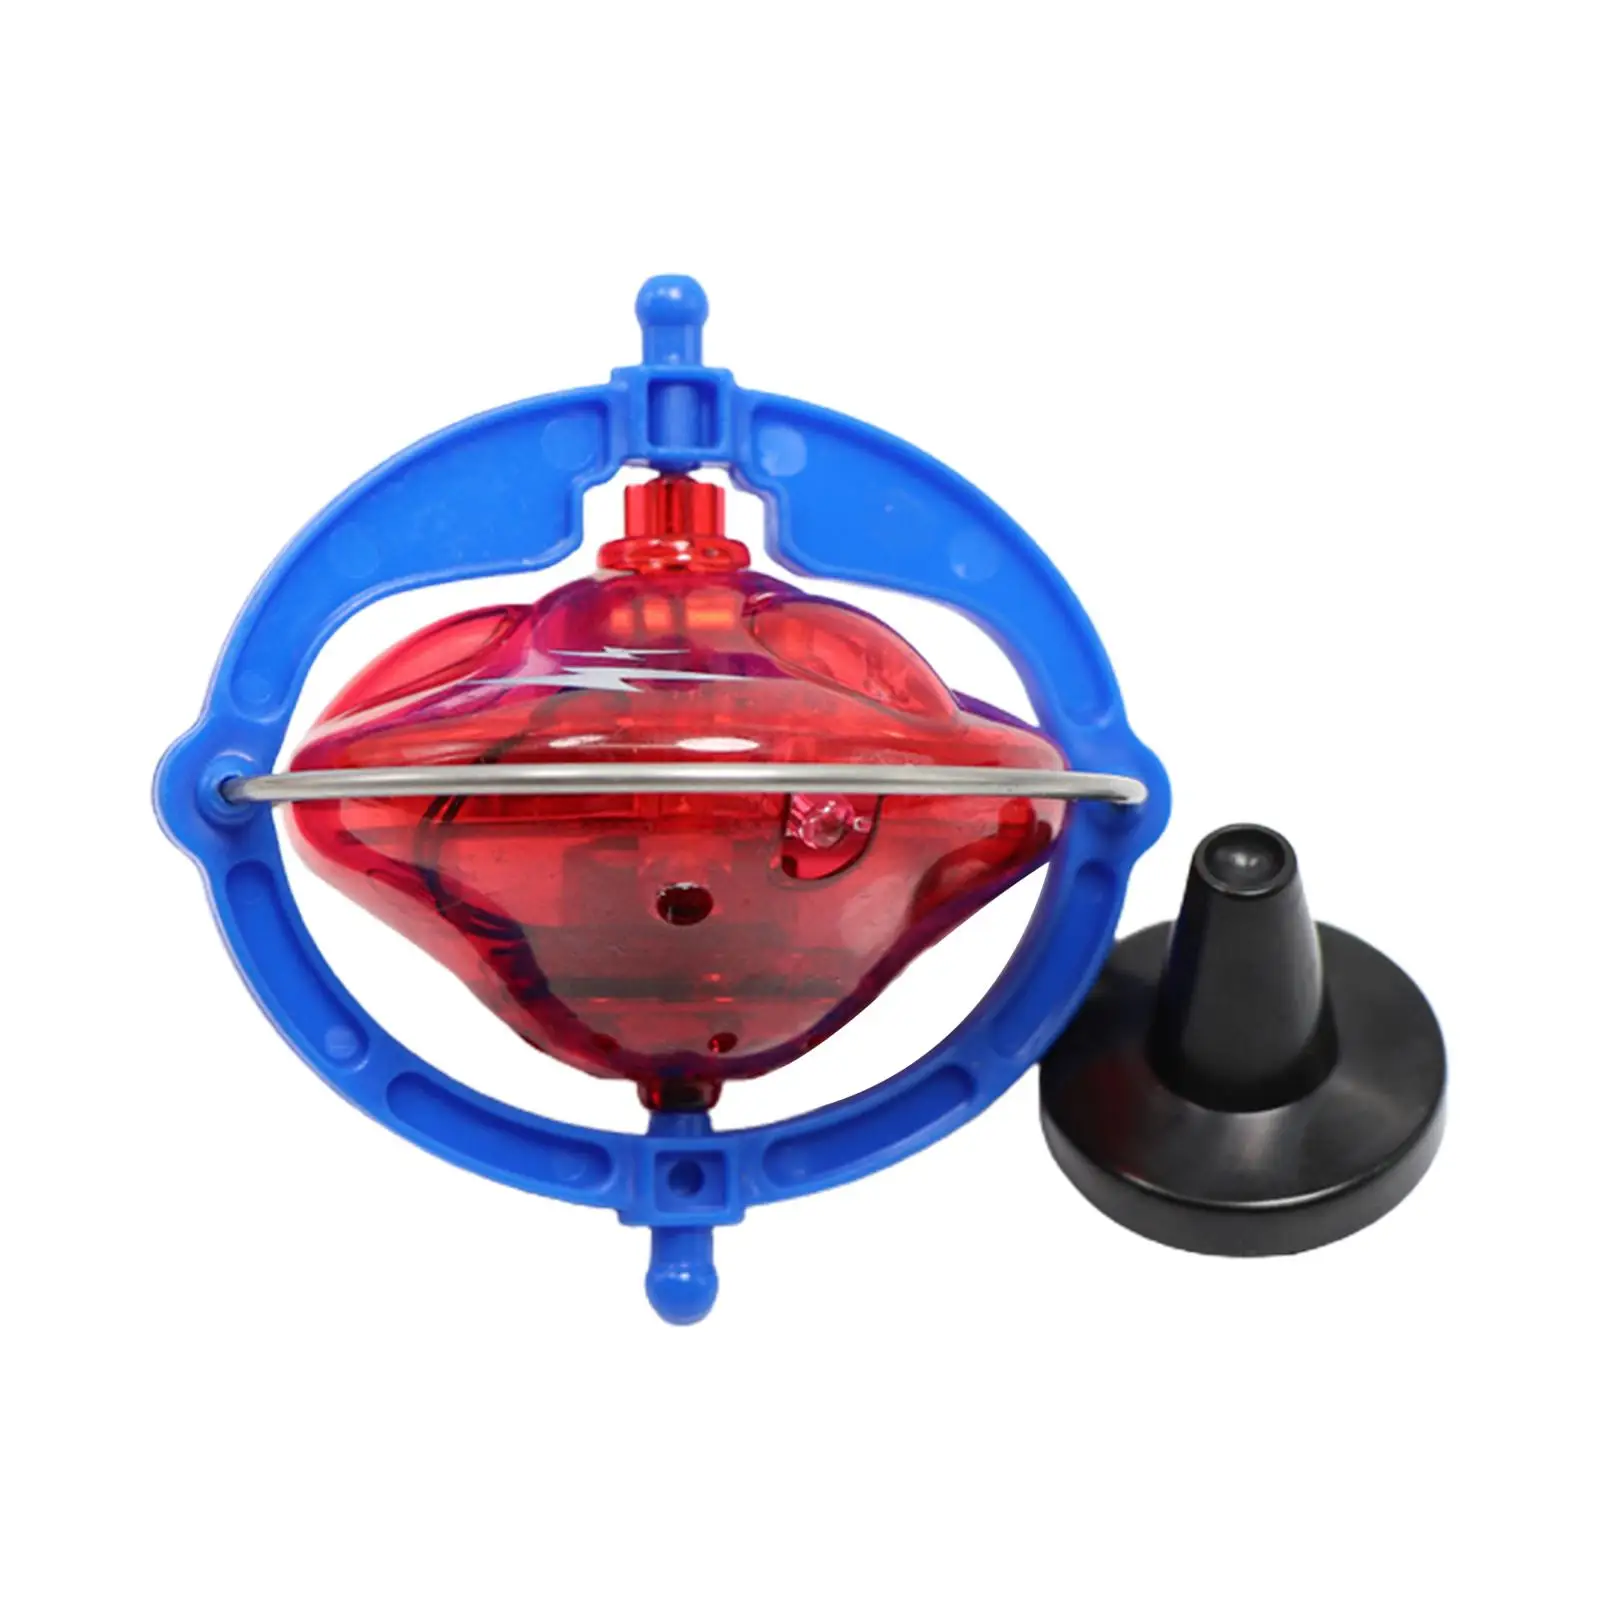 Rotating Tops Gyro Toy Children Toy Gyro Creative Rotating Toy for Living Room